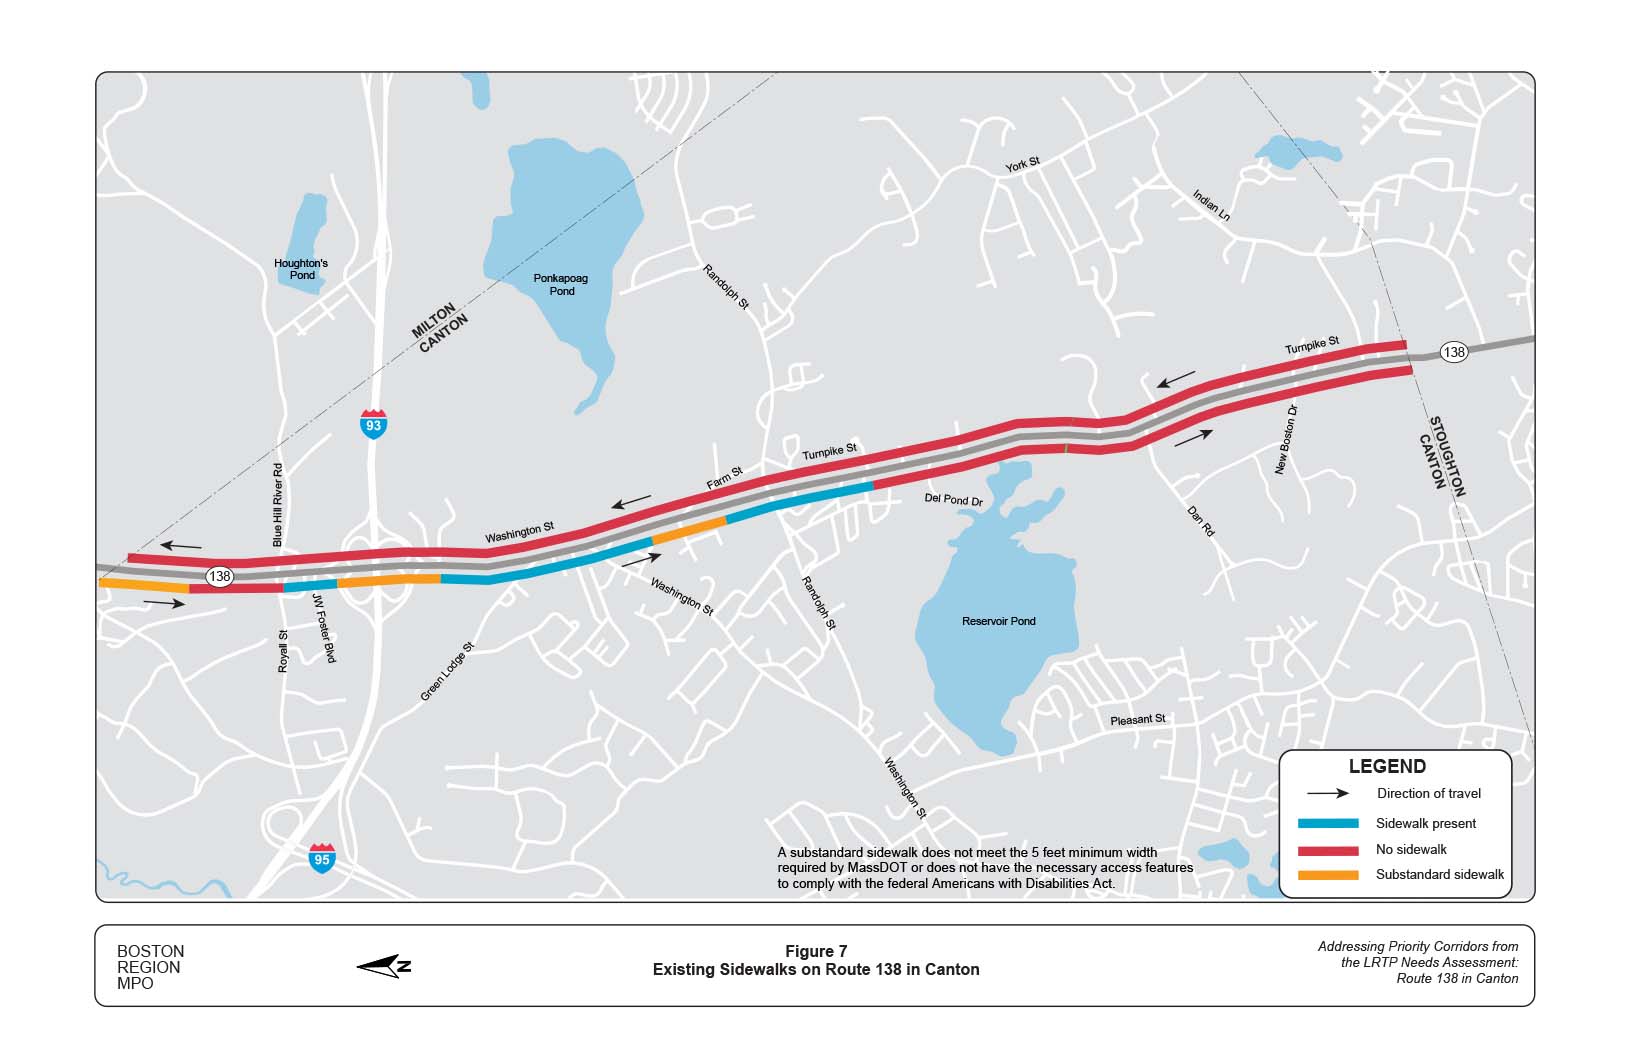 Figure 7 is a map of the study area showing the location of sidewalks on Route 138.